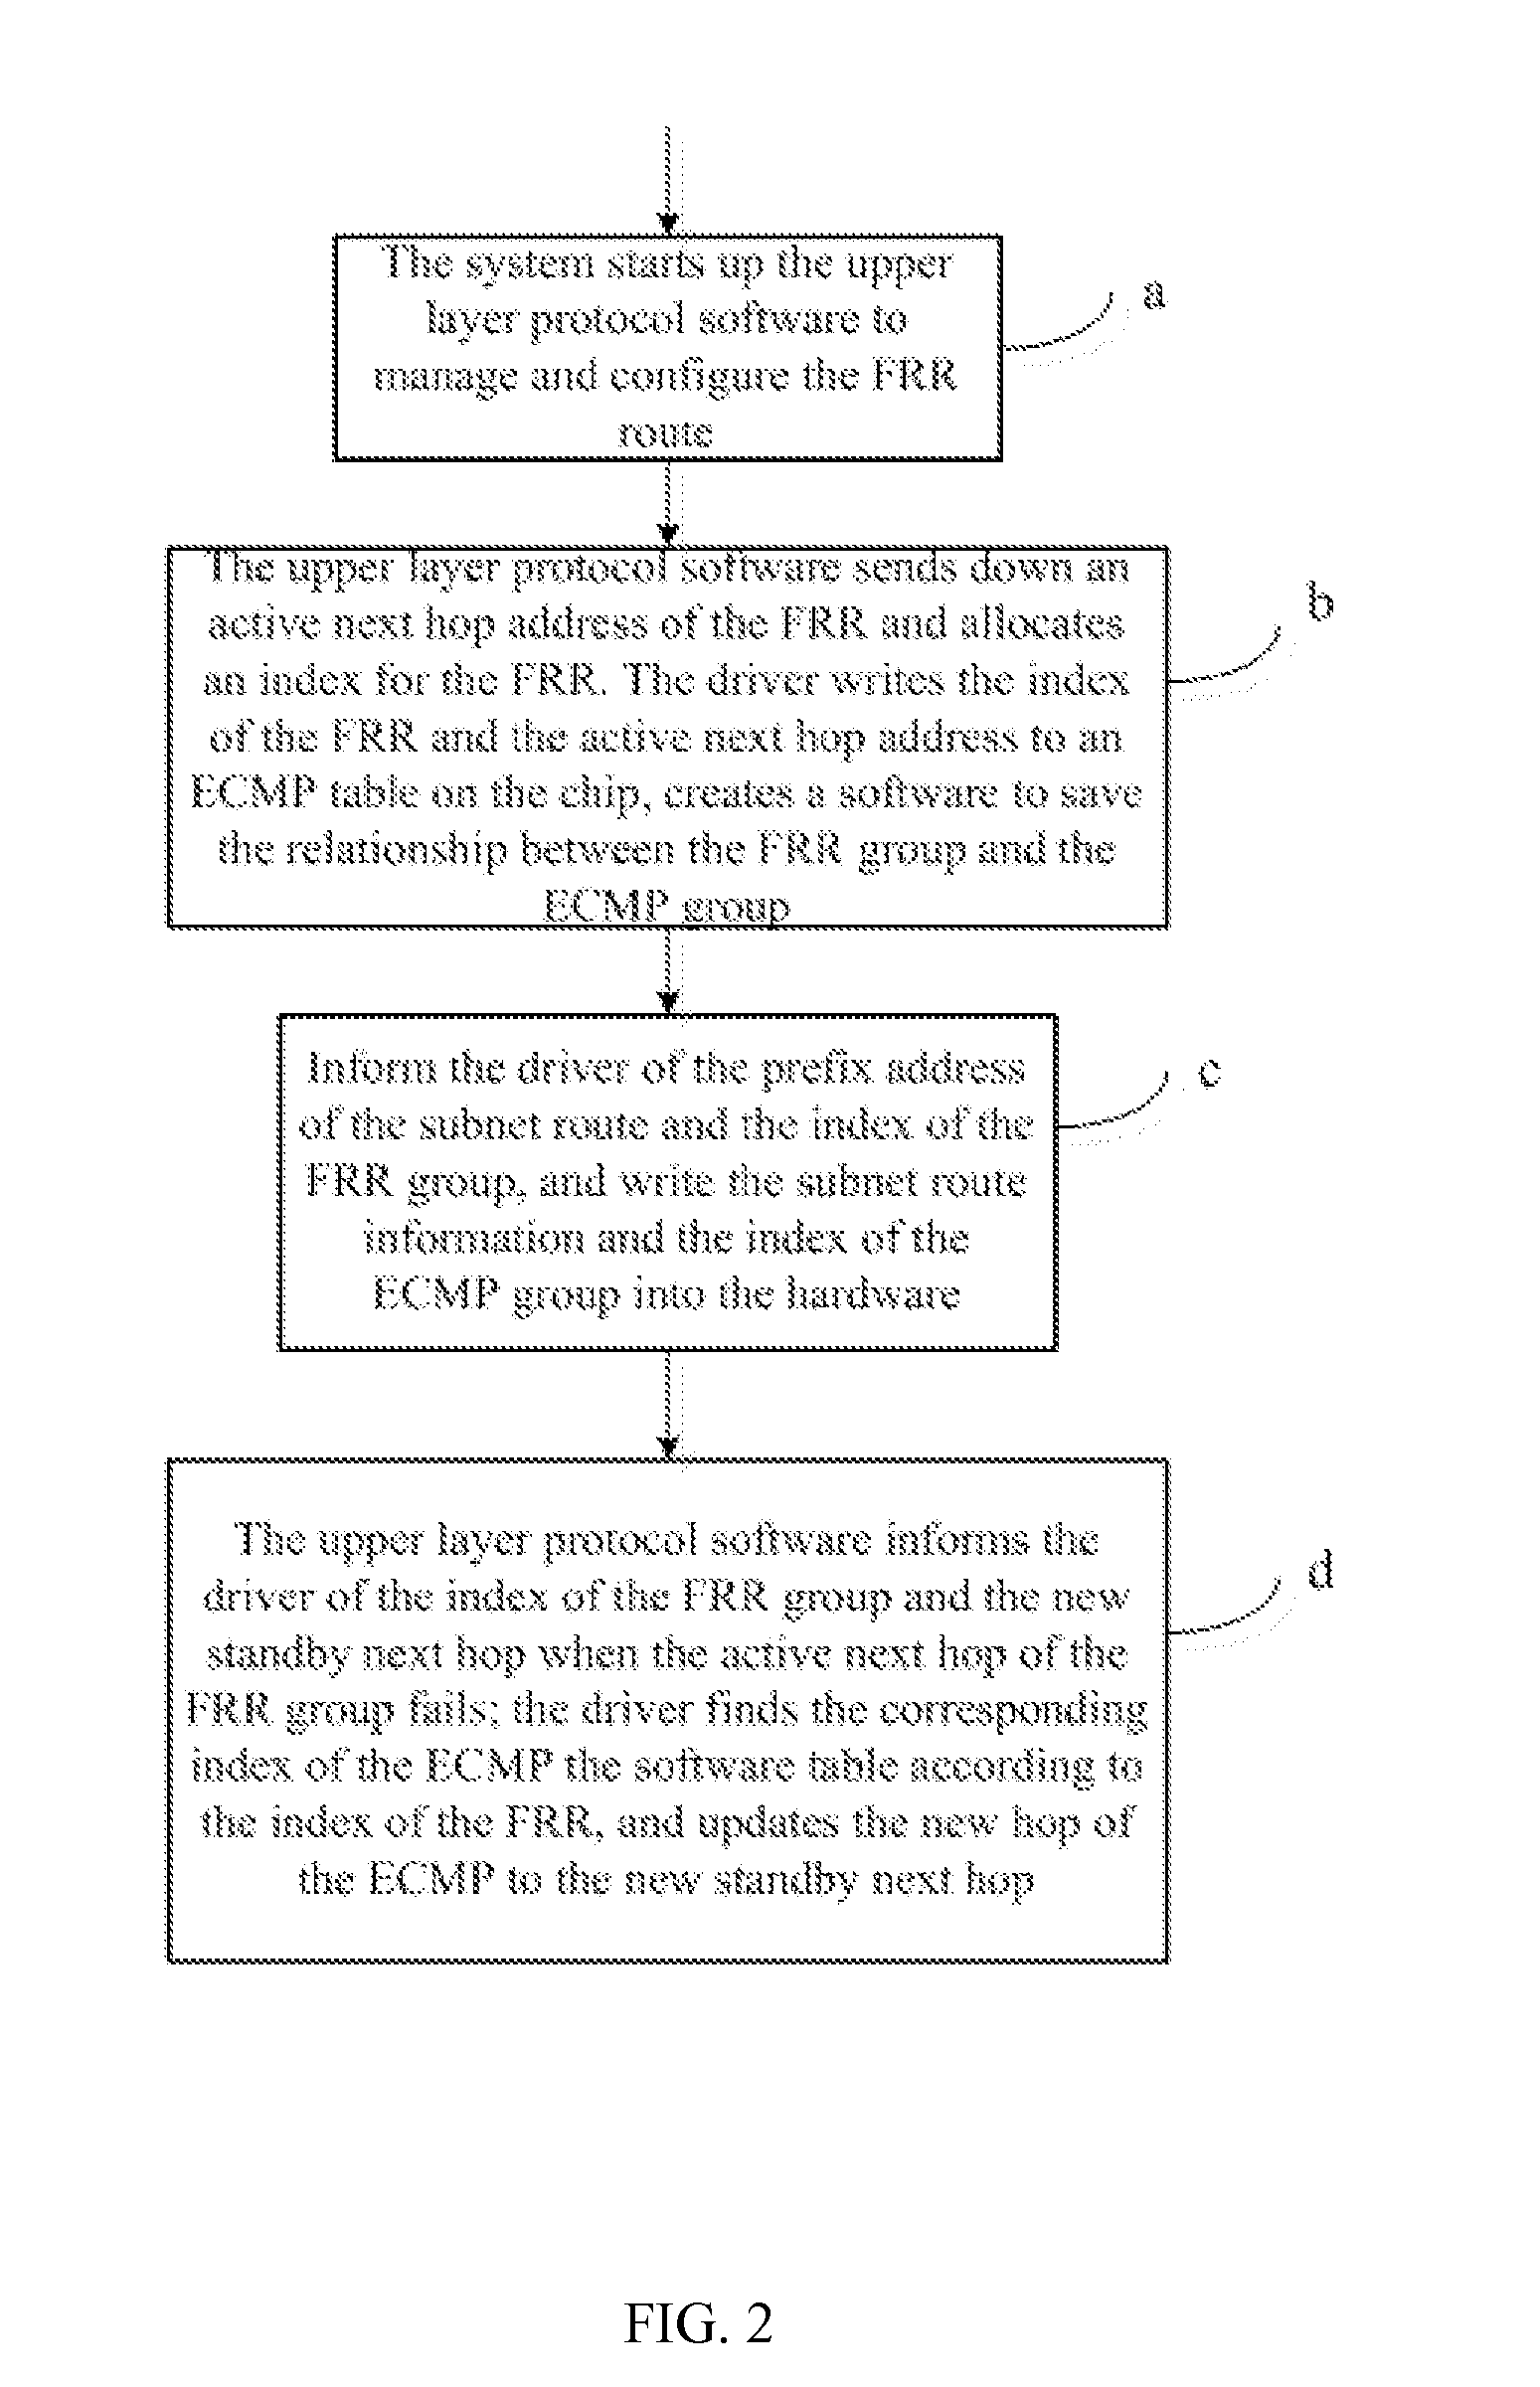 Method for implementing fast reroute